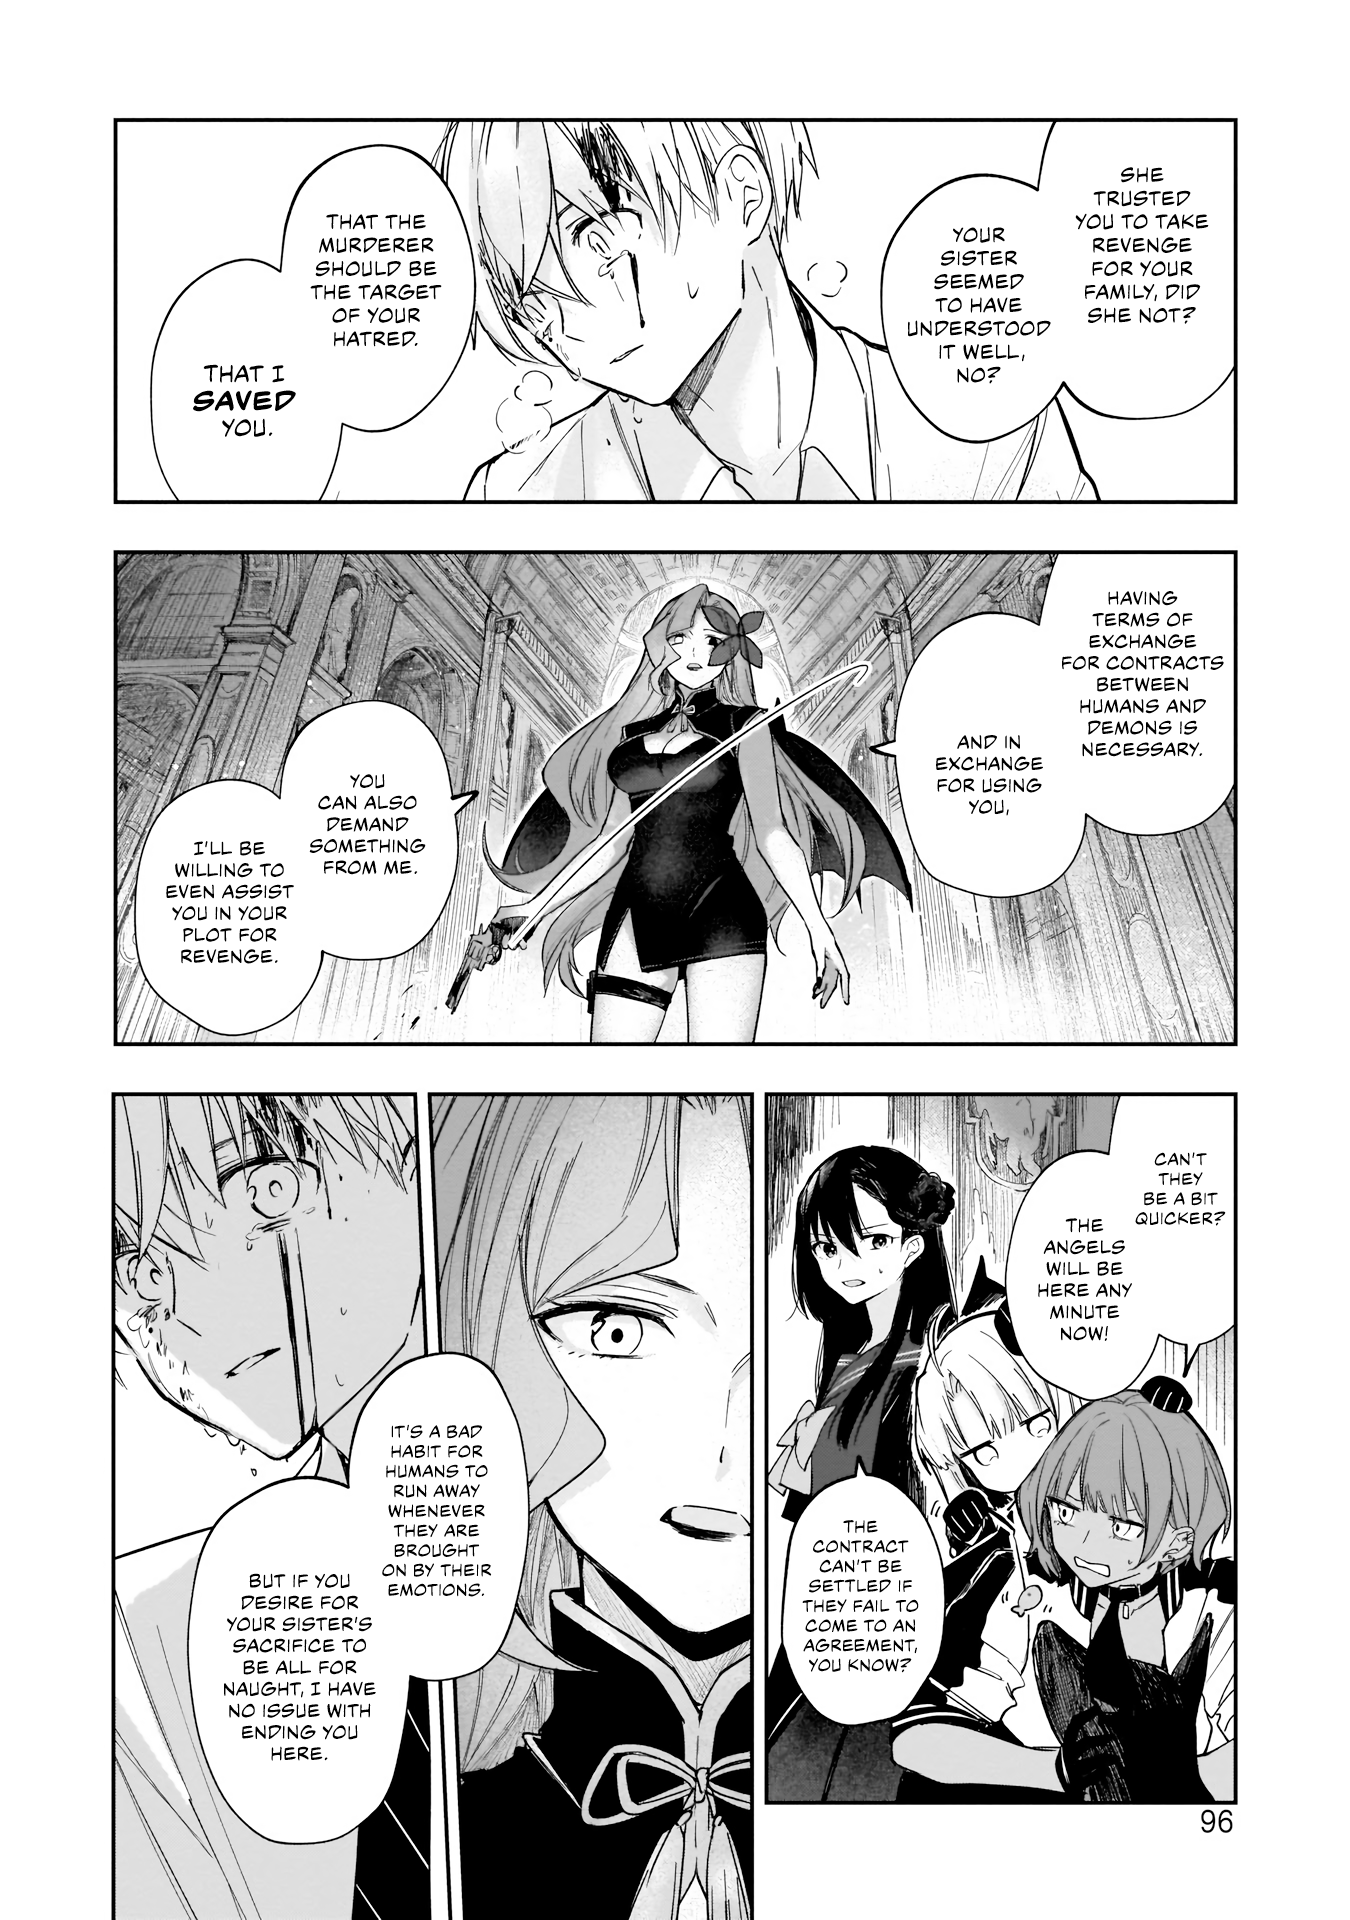 The Boy Of Alba And The Queen Of Hell Vol.1 Chapter 3